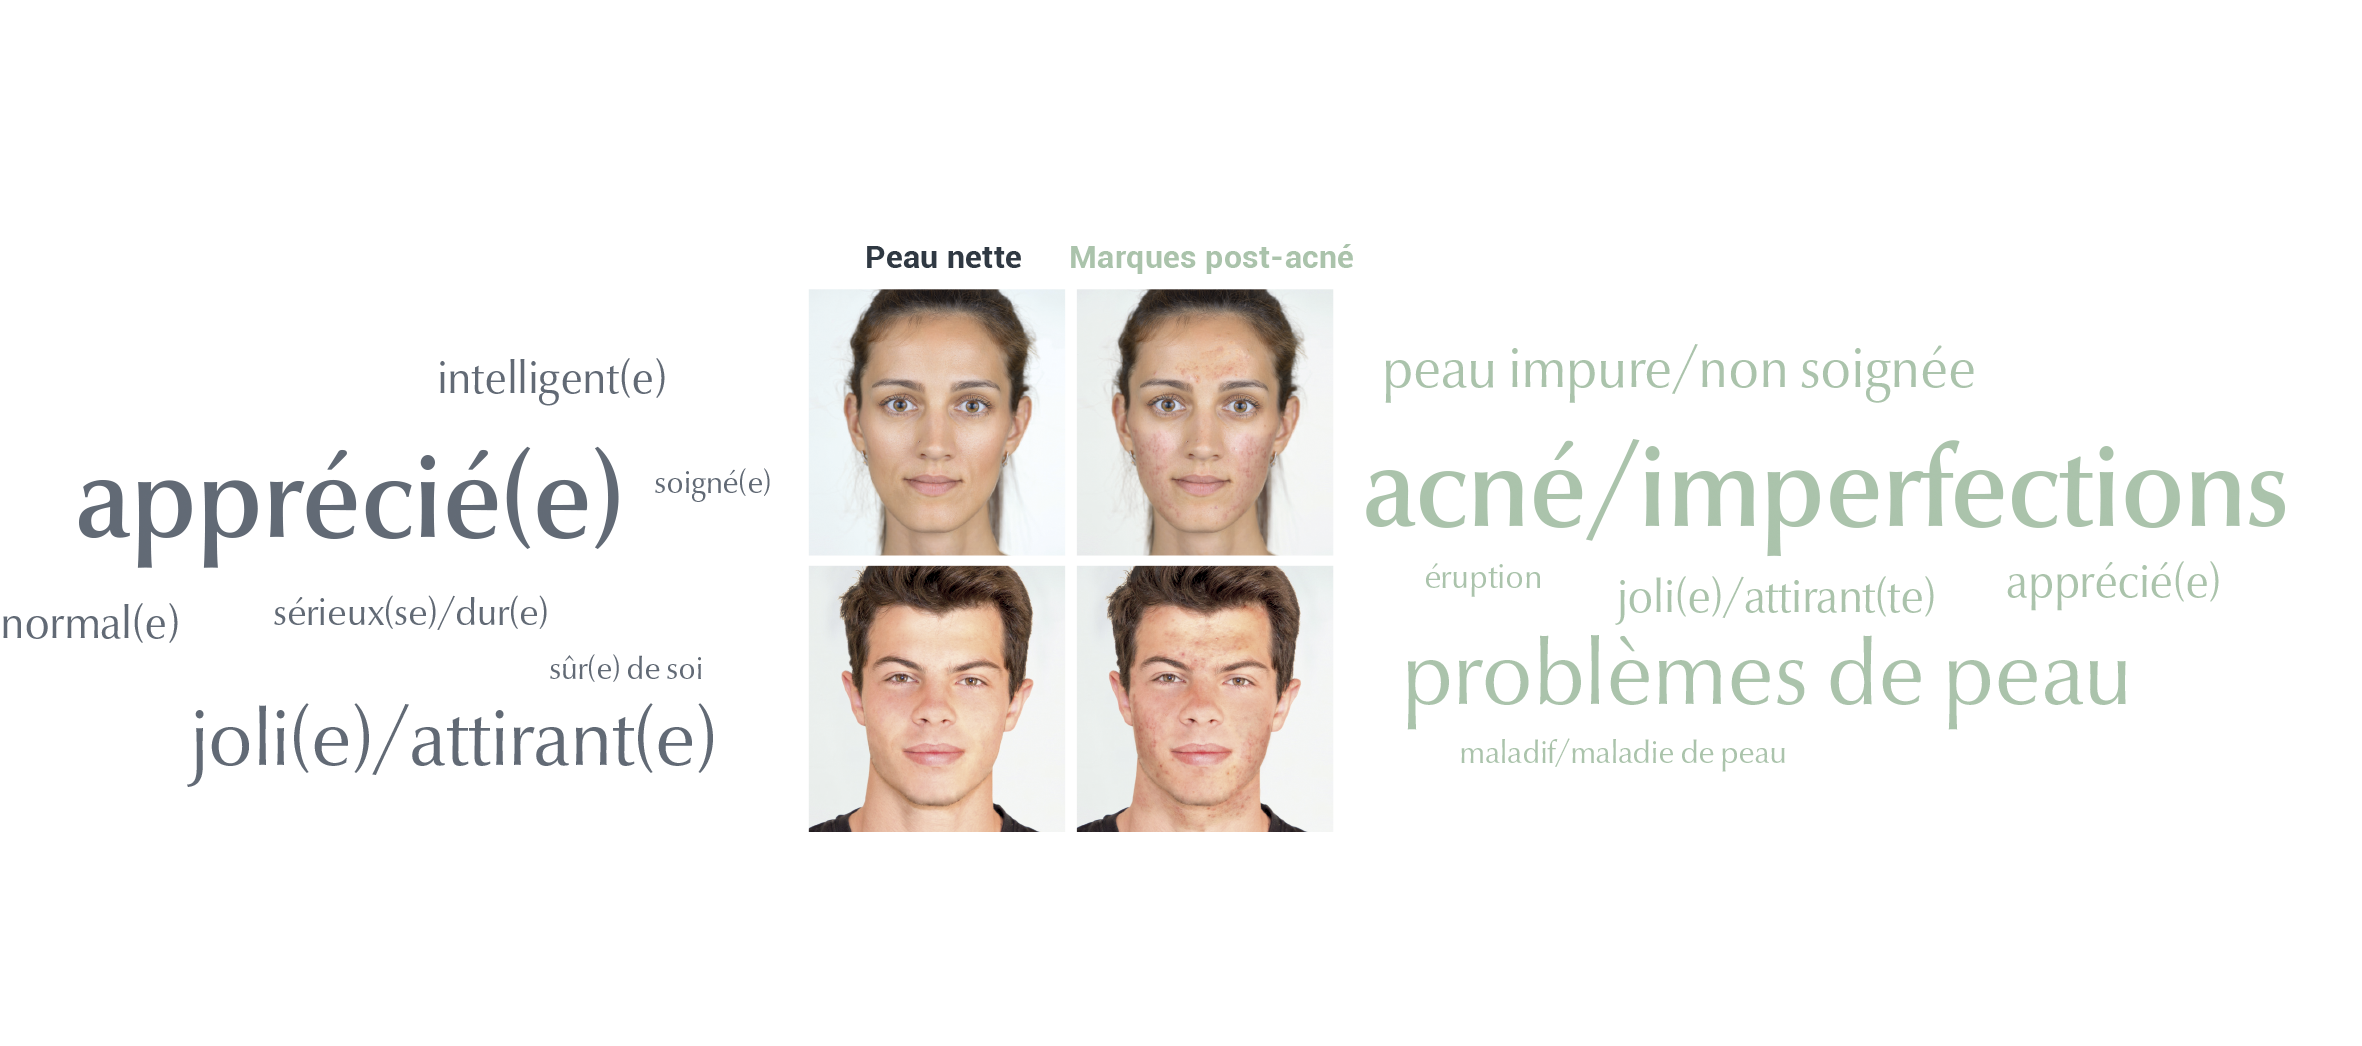 Explore how people with acne marks are perceived in our society.